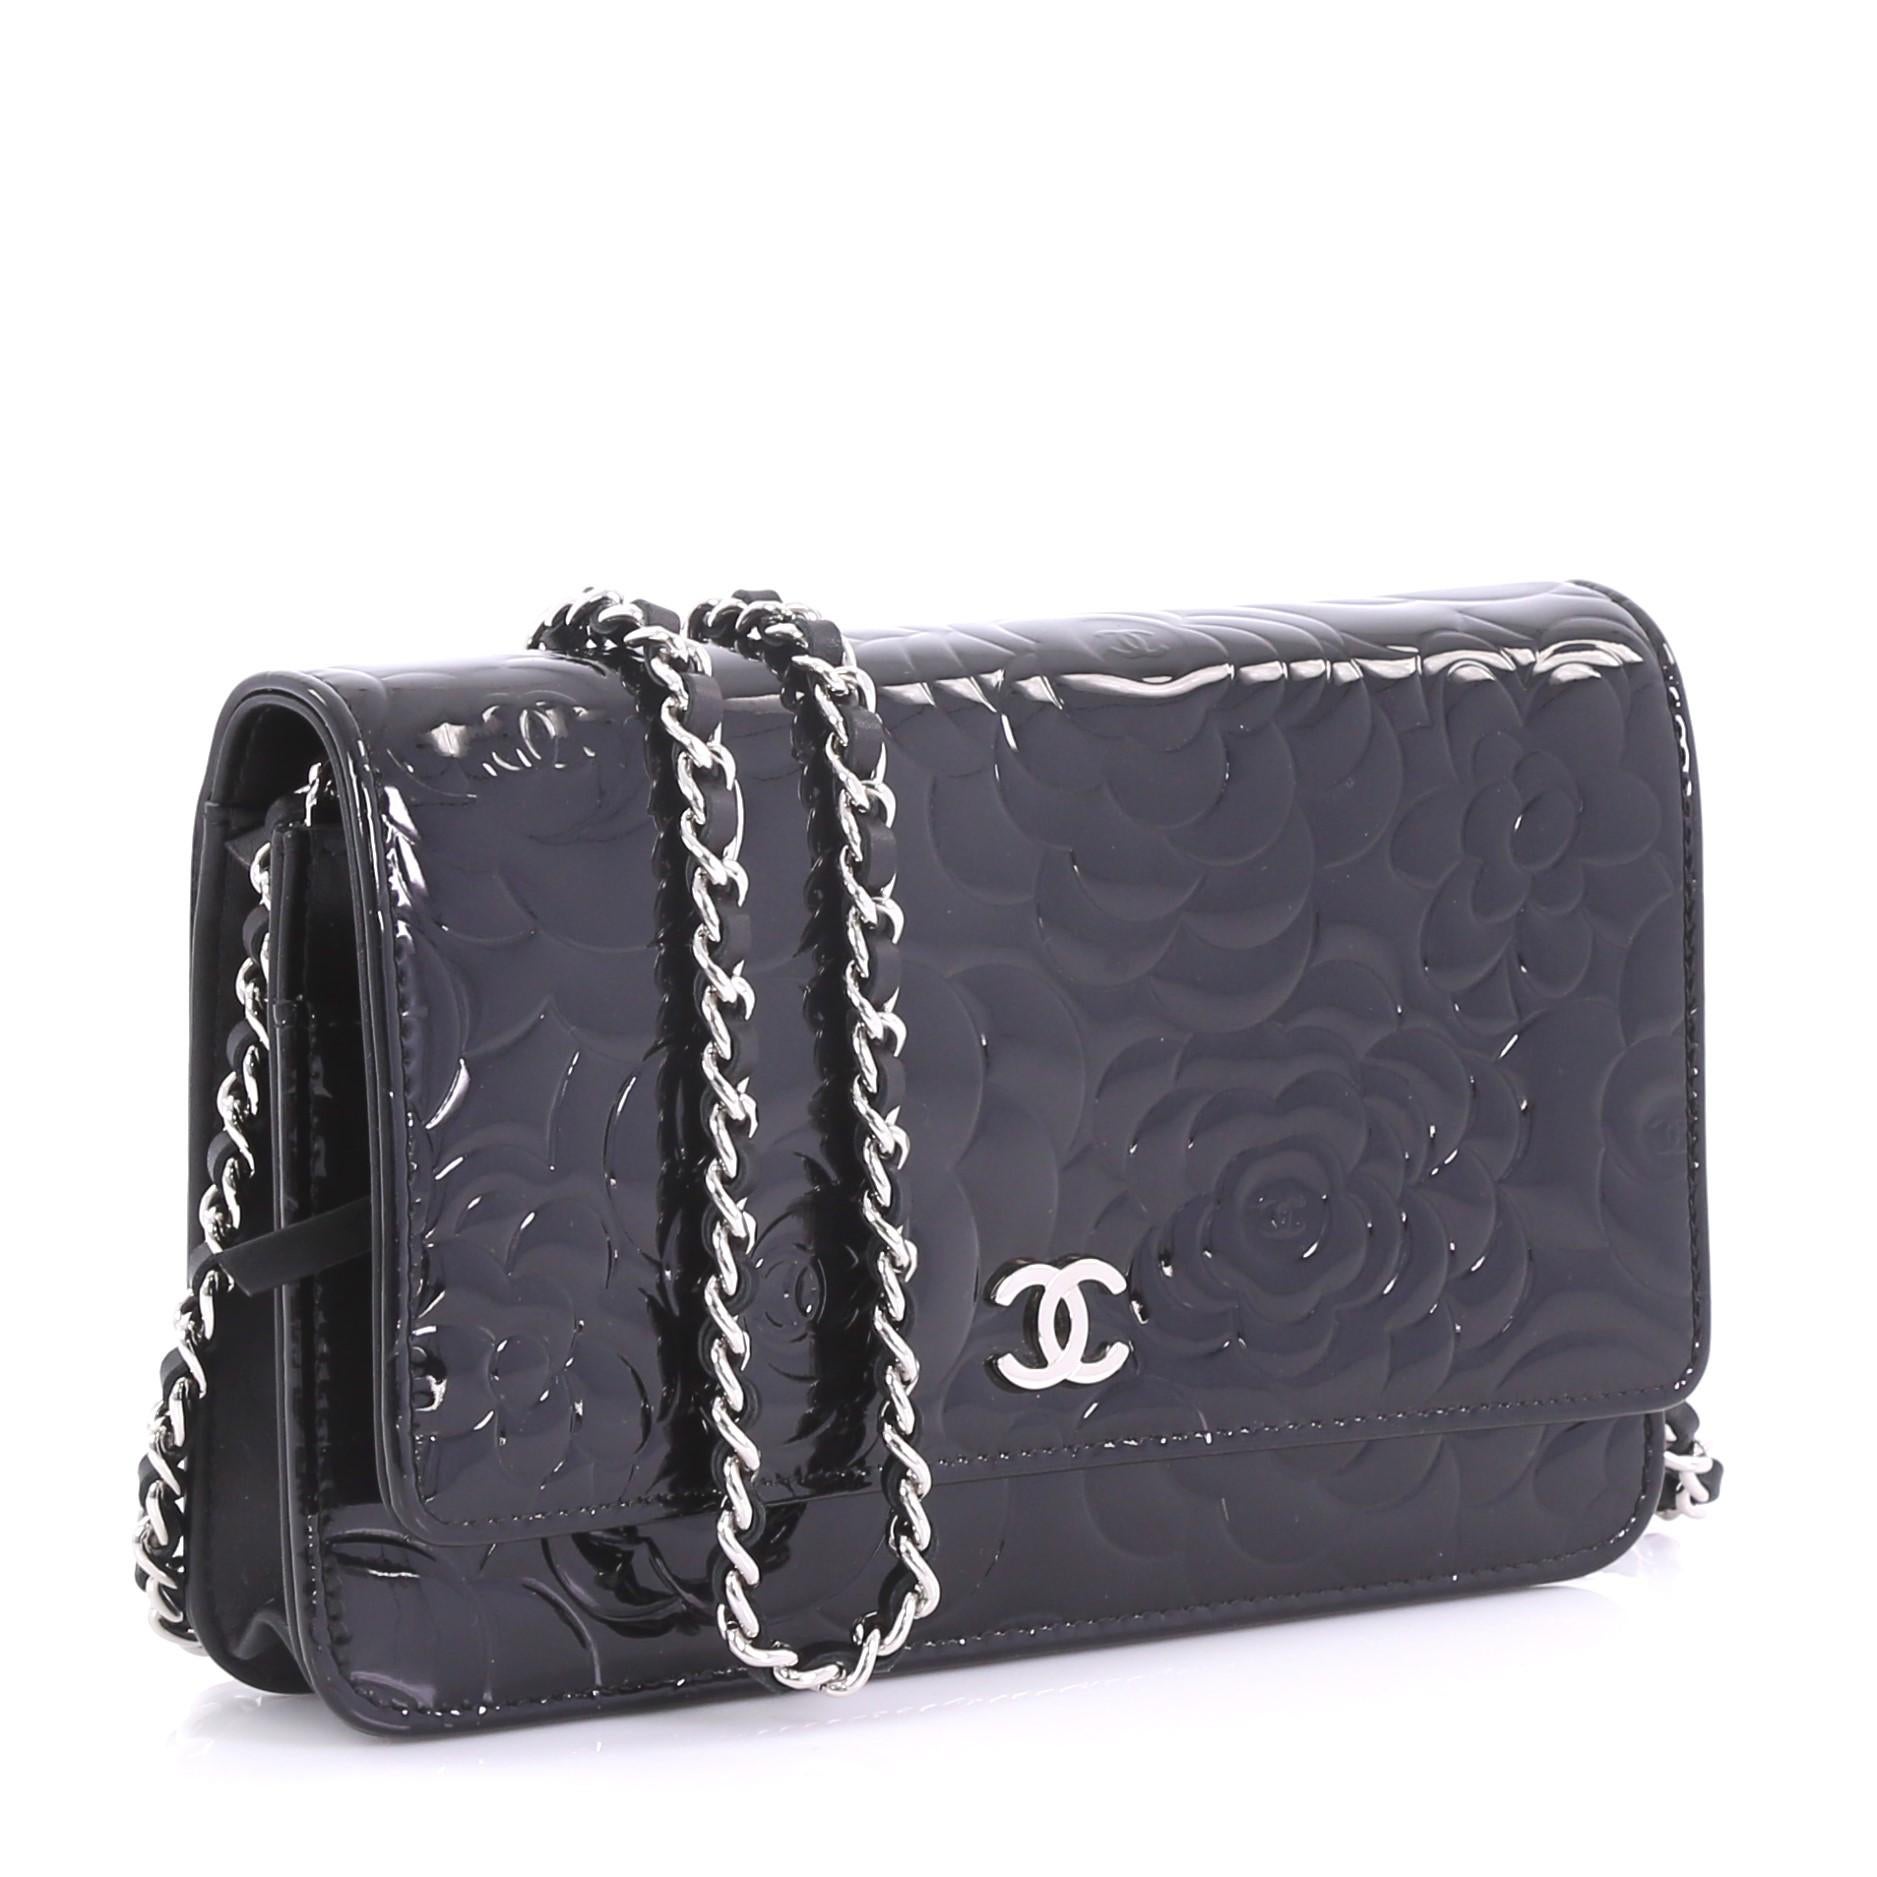 Black Chanel Wallet on Chain Camellia Patent